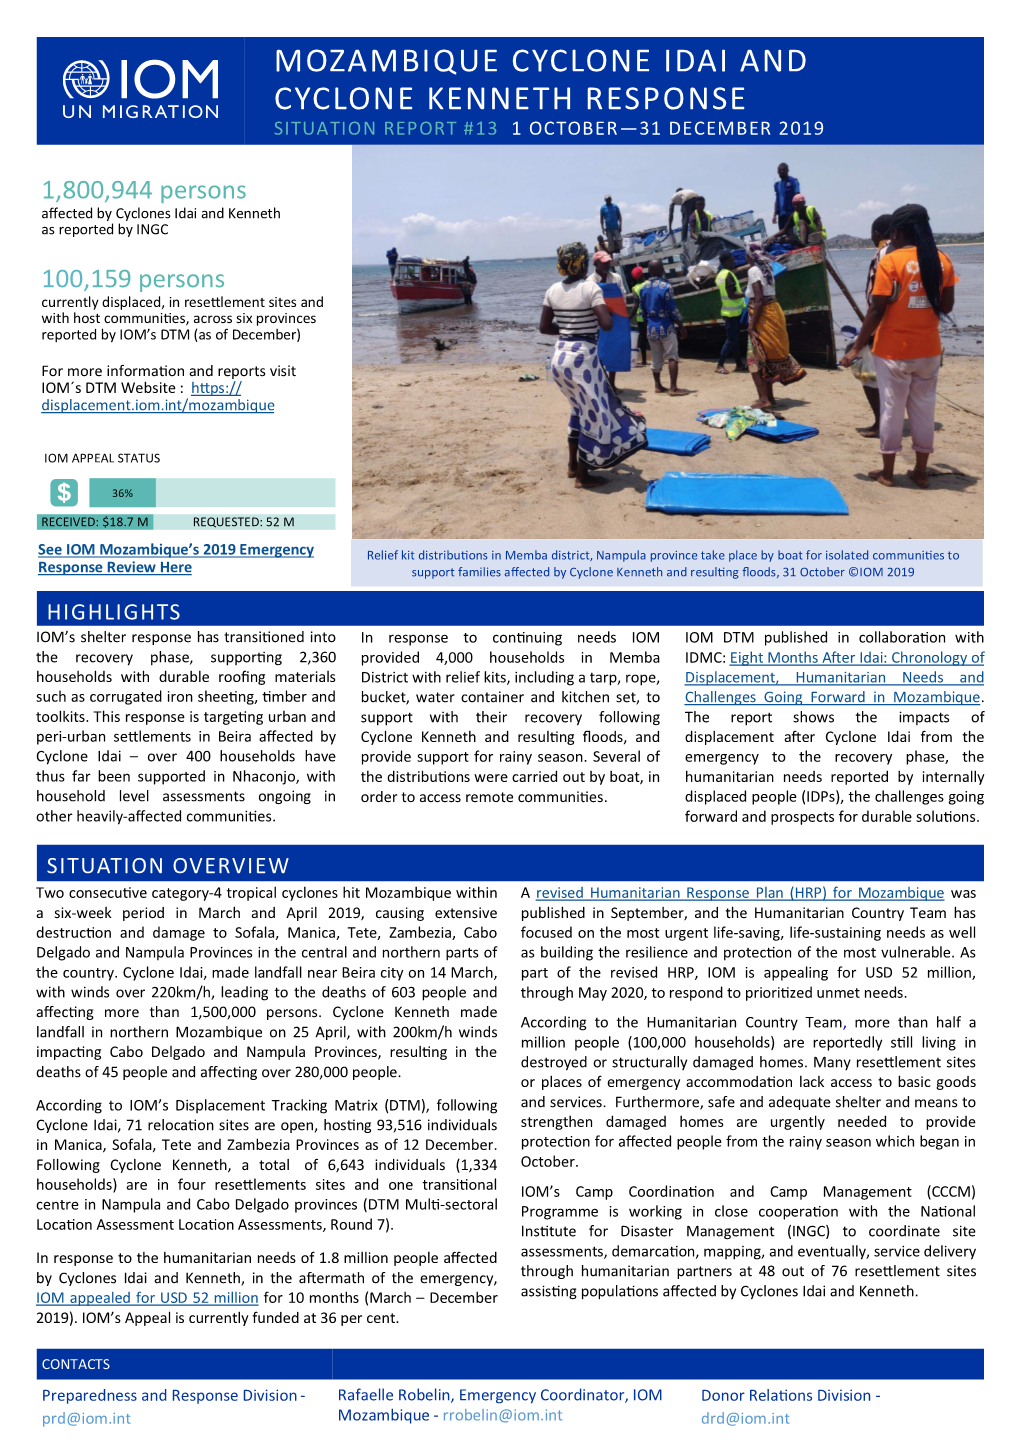 Mozambique Cyclone Idai and Cyclone Kenneth Response Situation Report #13 1 October—31 December 2019